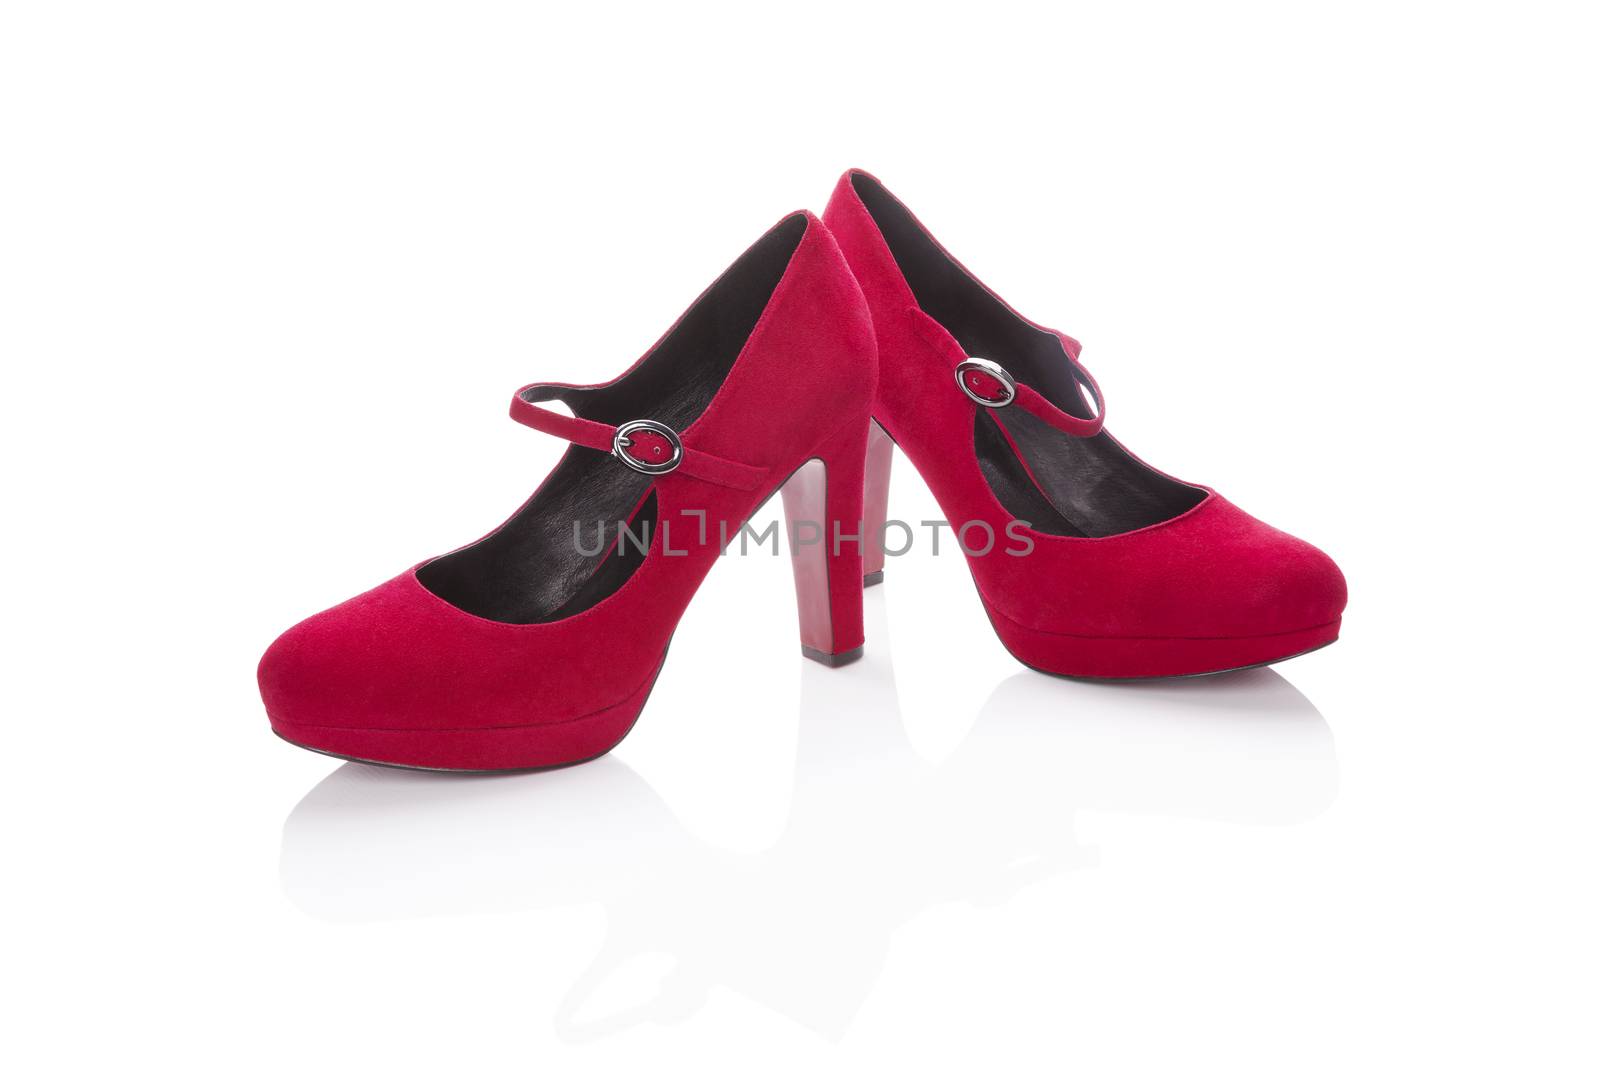 Red high heels isolated on white background with reflection. Classic woman shoe.